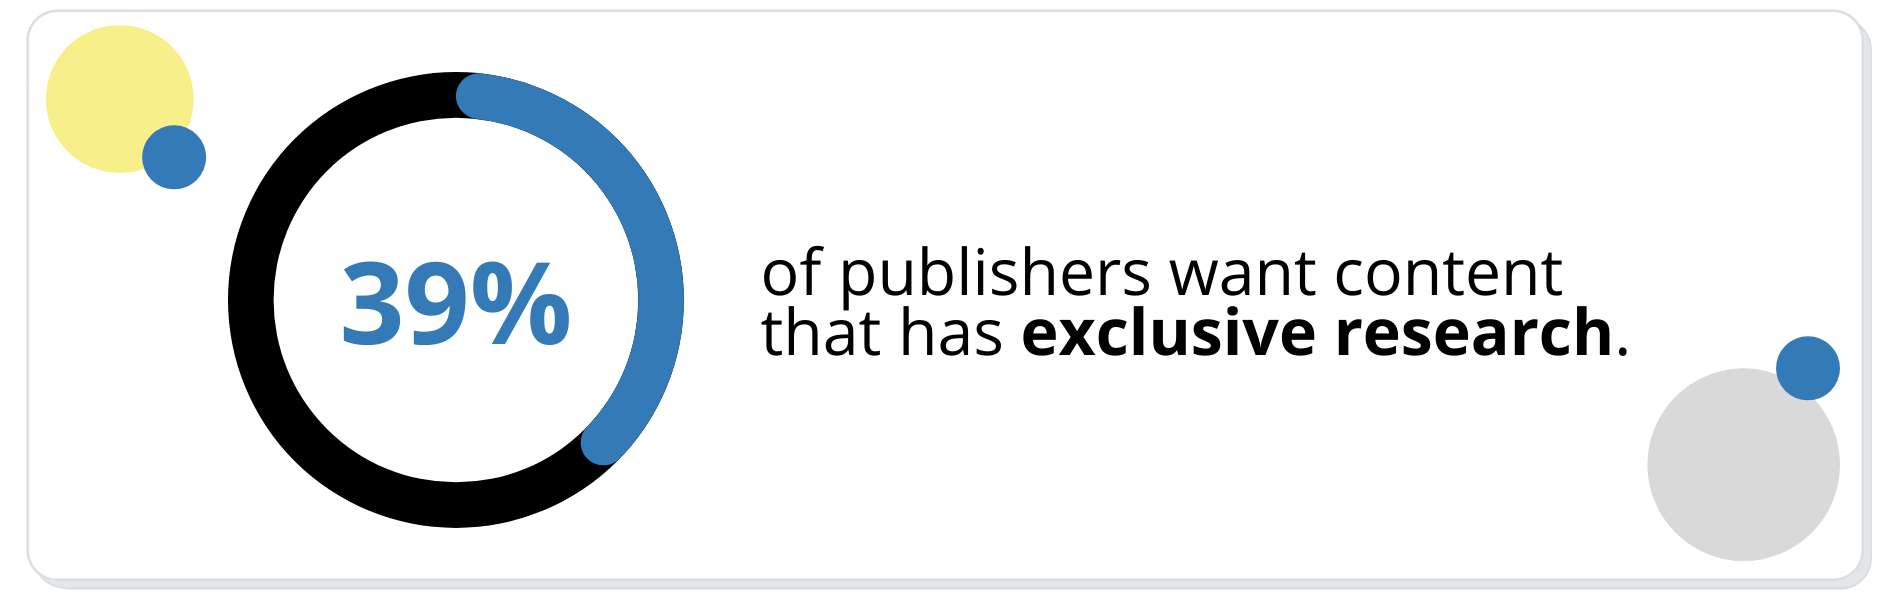 of publishers want content that has exclusive research.